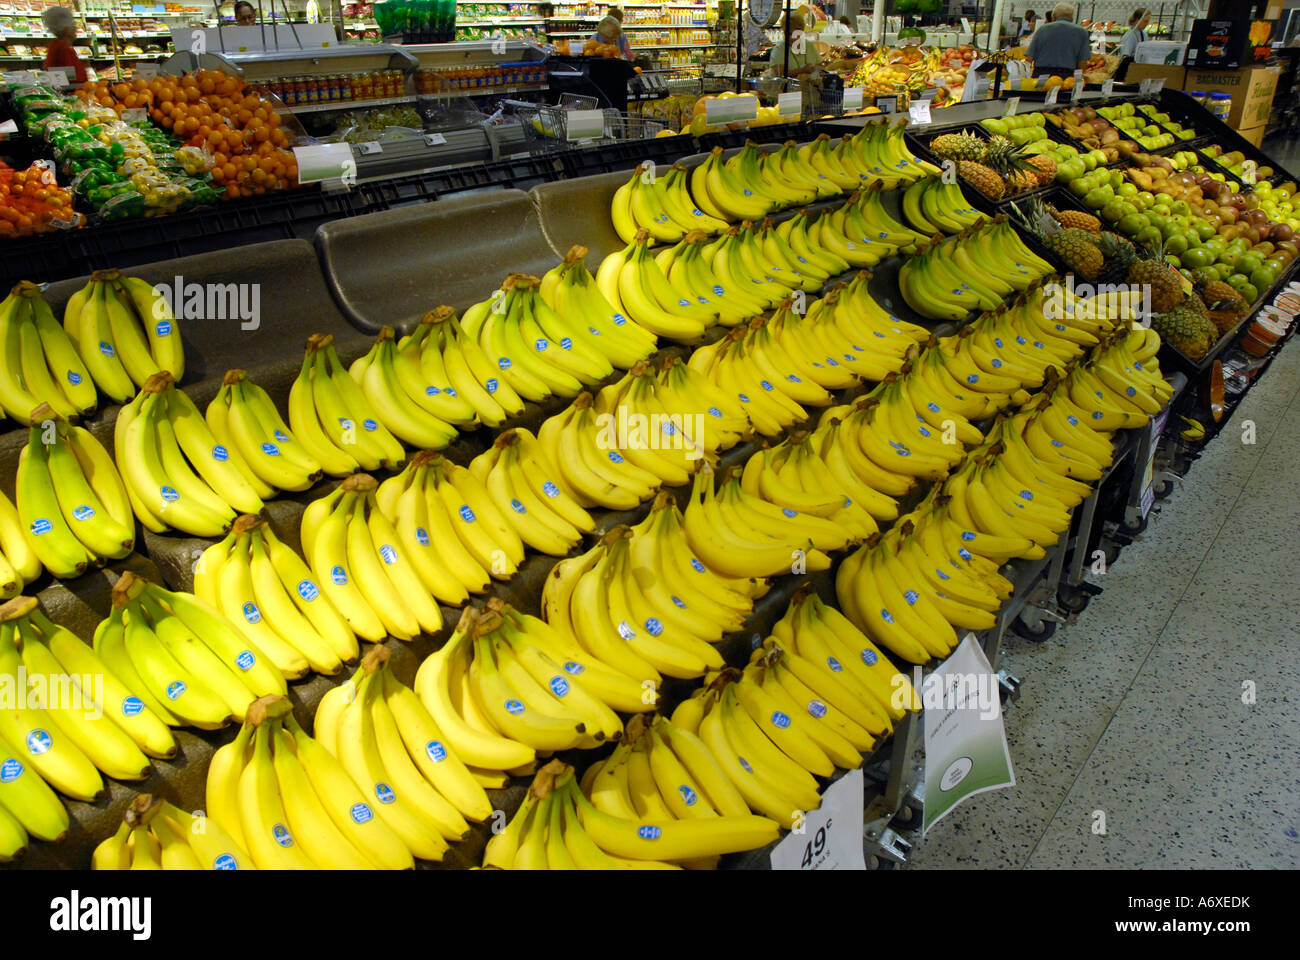 Bananas on display in a supermarket grocery store Stock Photo, Royalty